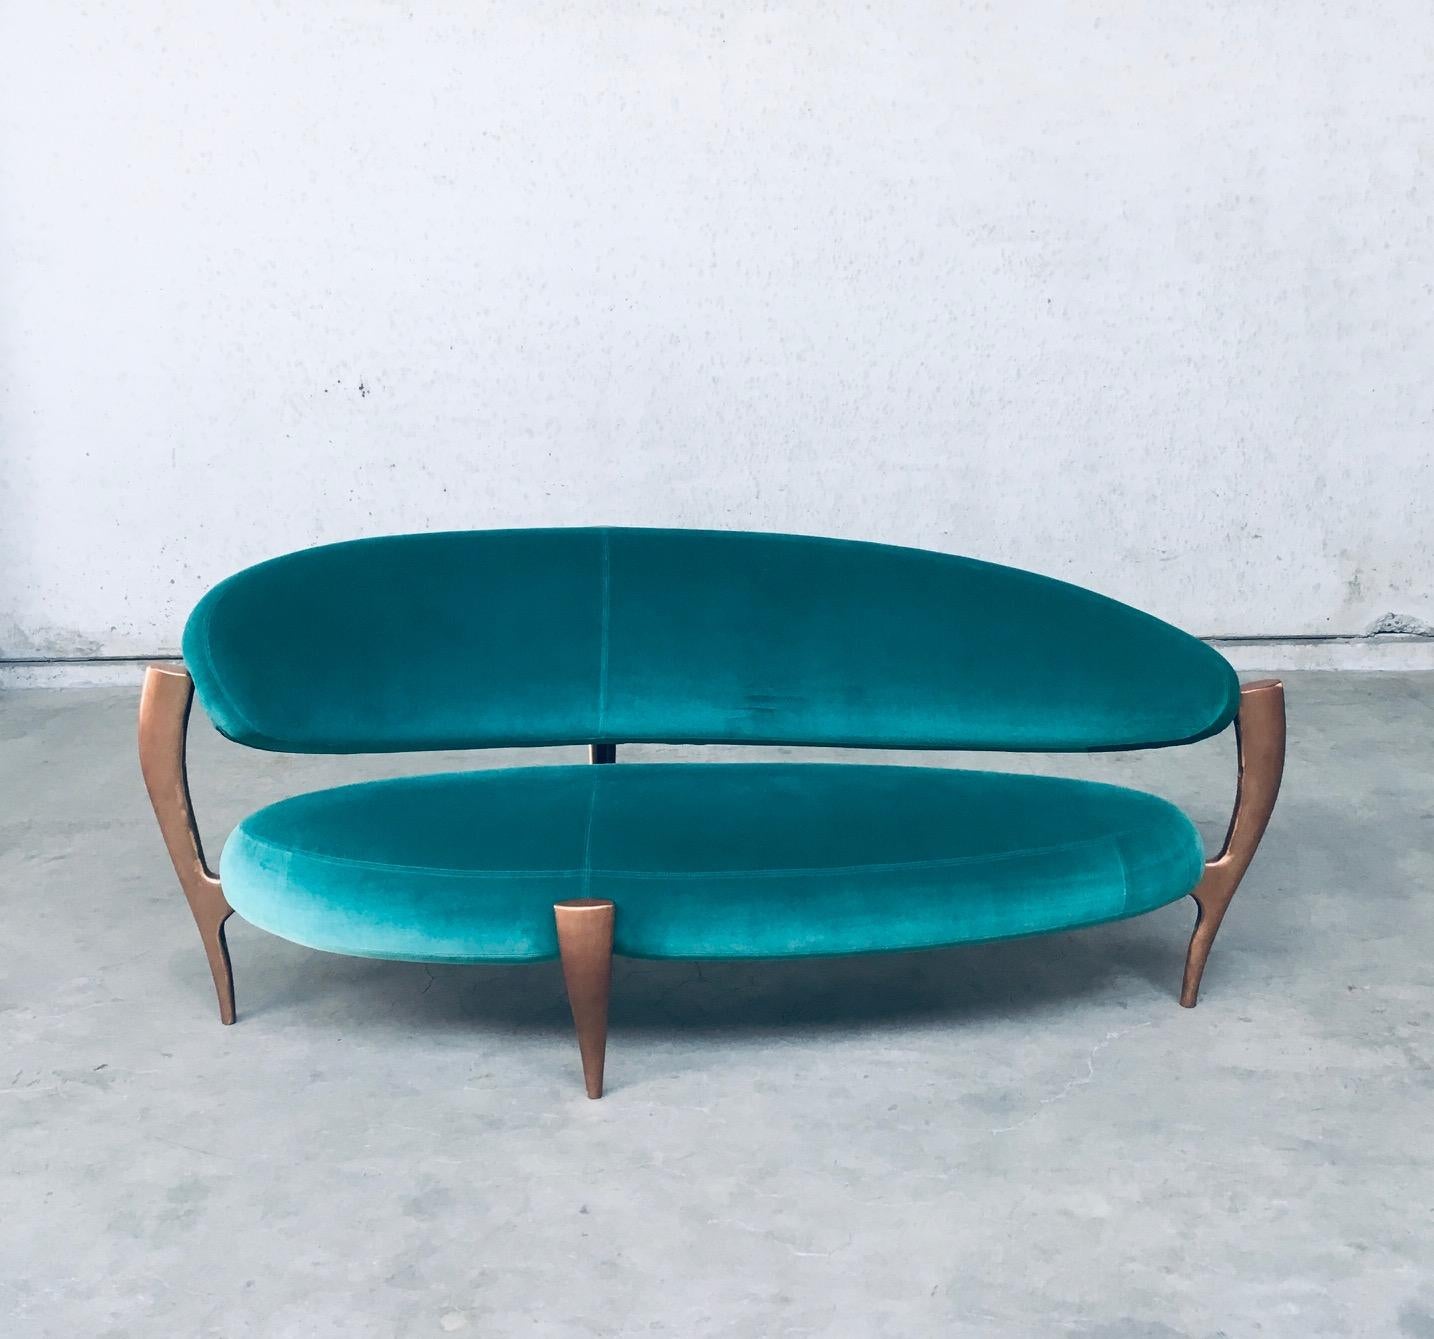 Rare Postmodern modern Italian design floating free form curved 3 seat Sofa with Sculptural base. Made in Italy 1990's. Made with the Highest quality materials. Velvet turquoise sea green fabric on handmade solid copper metal feet base. Beautiful